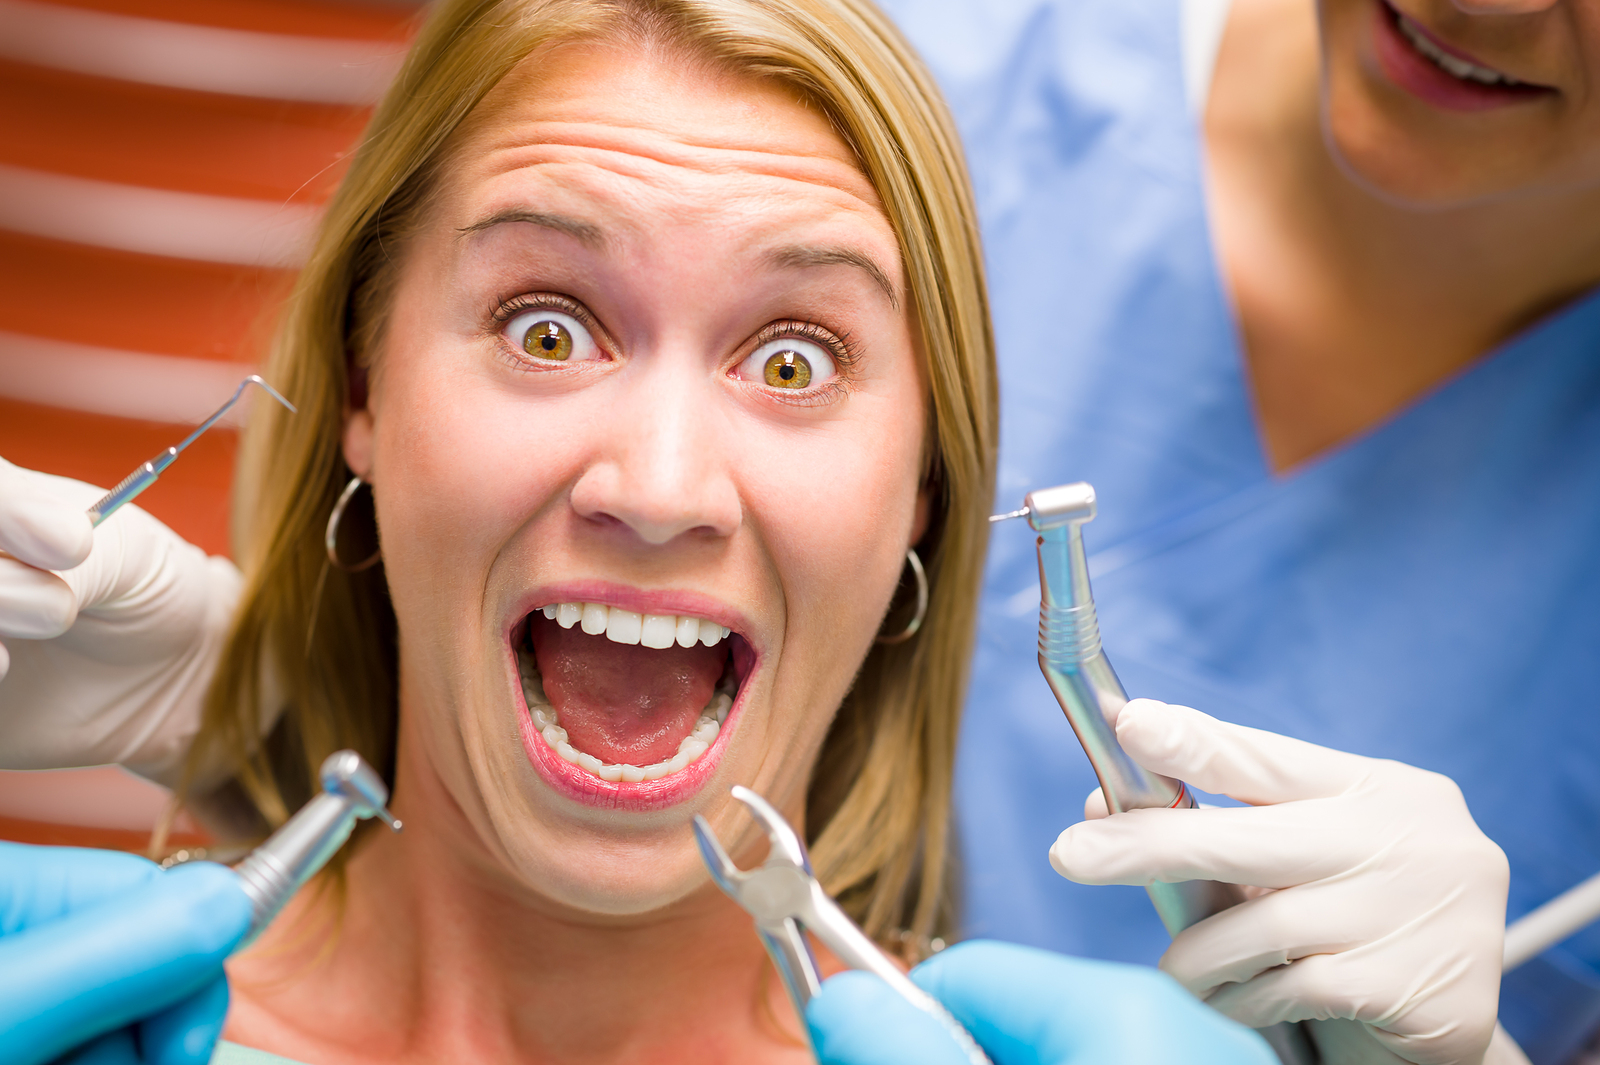 How to reduce anxiety when visiting the dentist